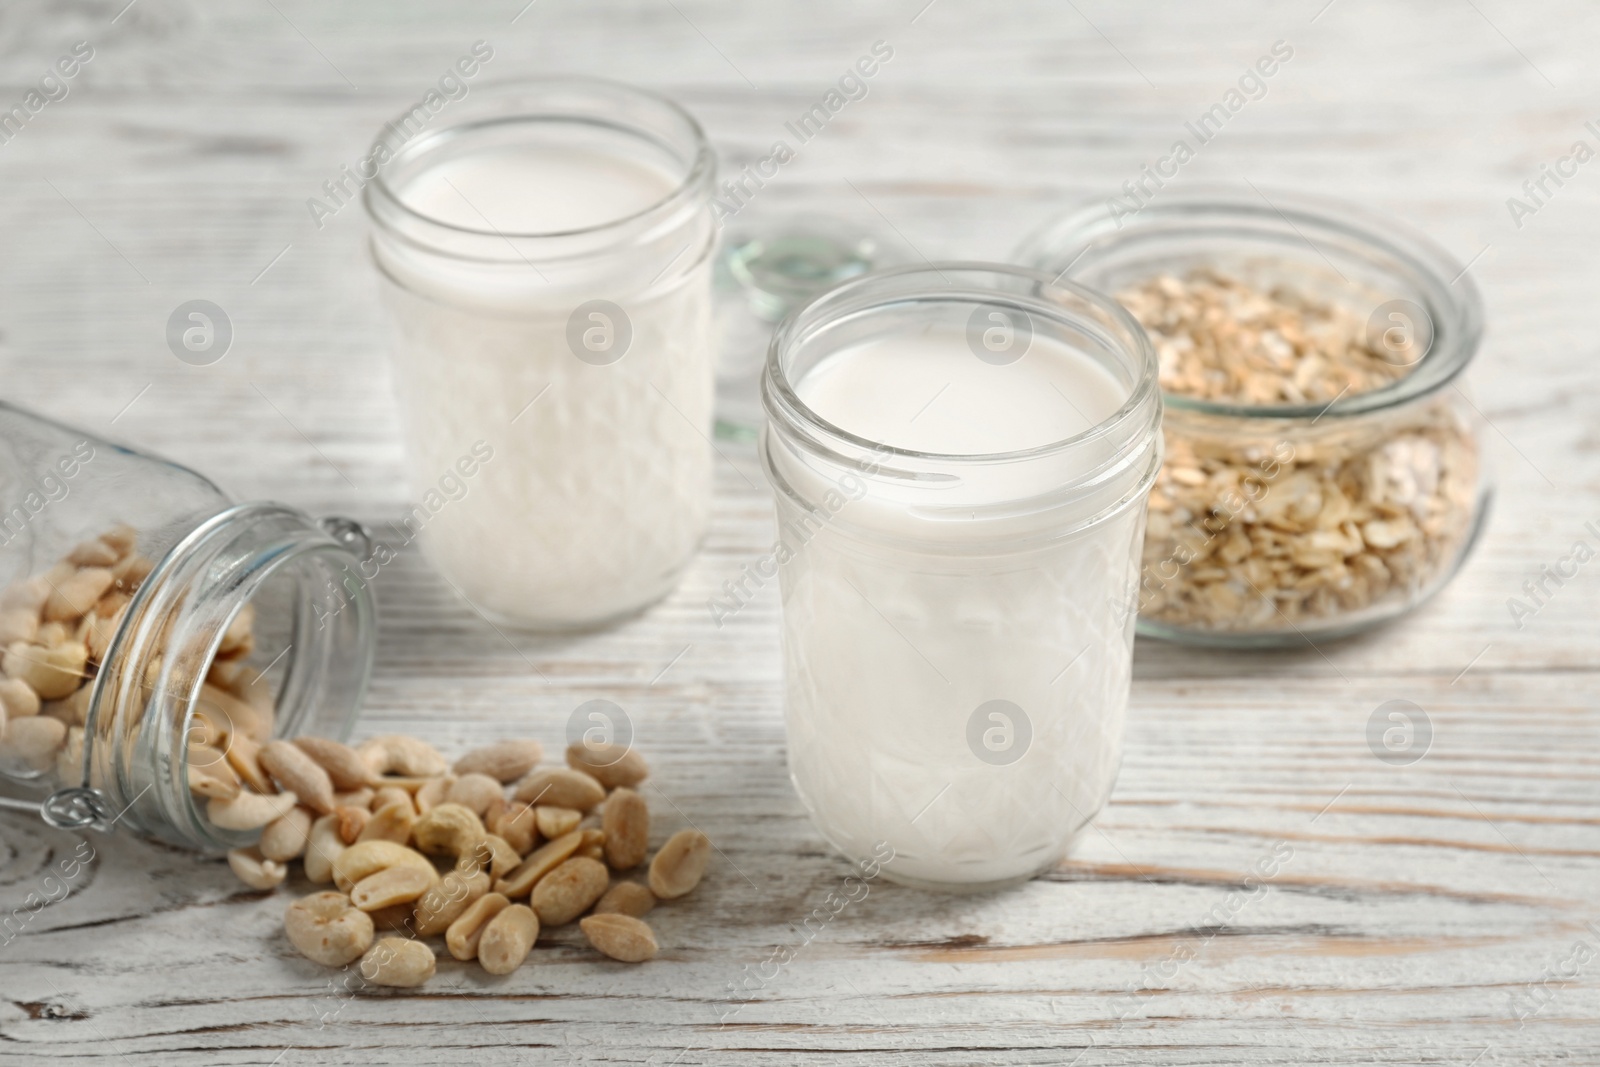 Photo of Jars with peanut and oat milk on wooden background